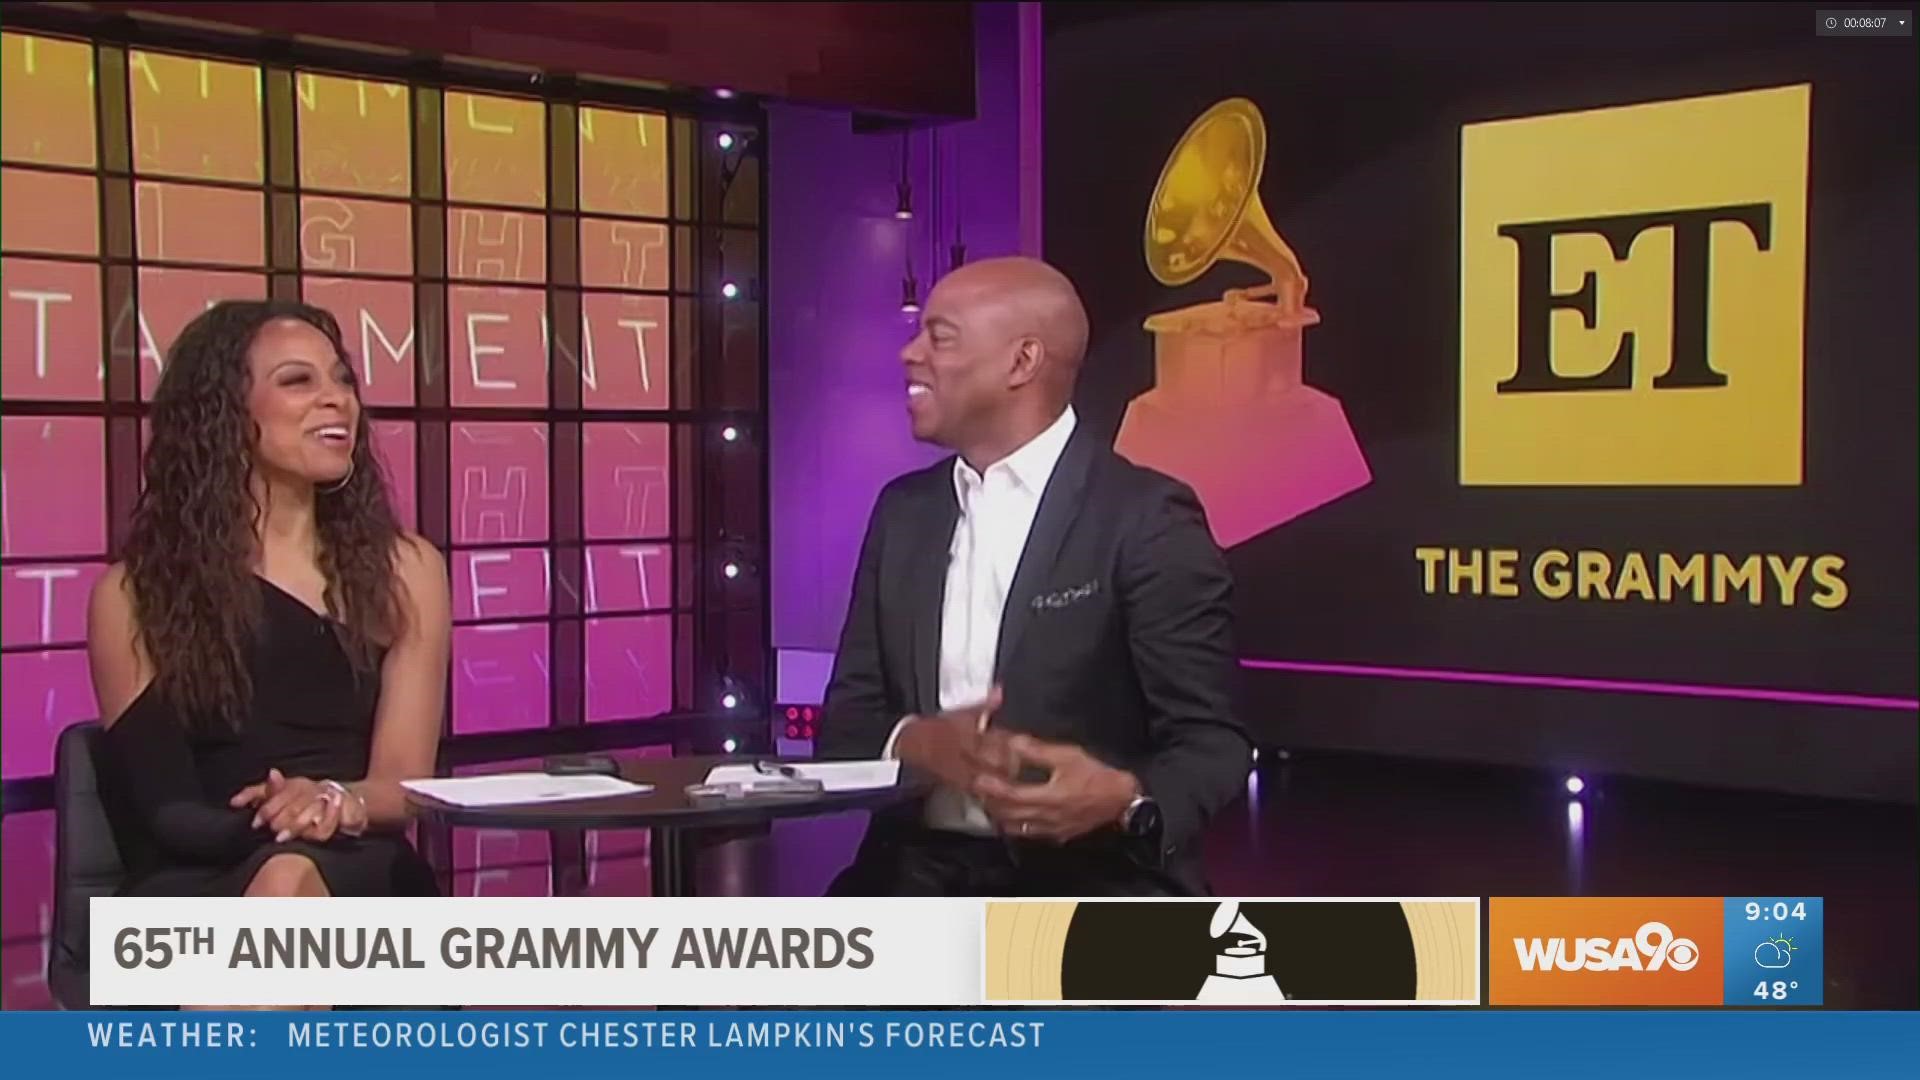 Kevin Frazier and Nischelle Turner from Entertainment Tonight tell Kristen and Ellen about their top moments of the 65th annual Grammy Awards.